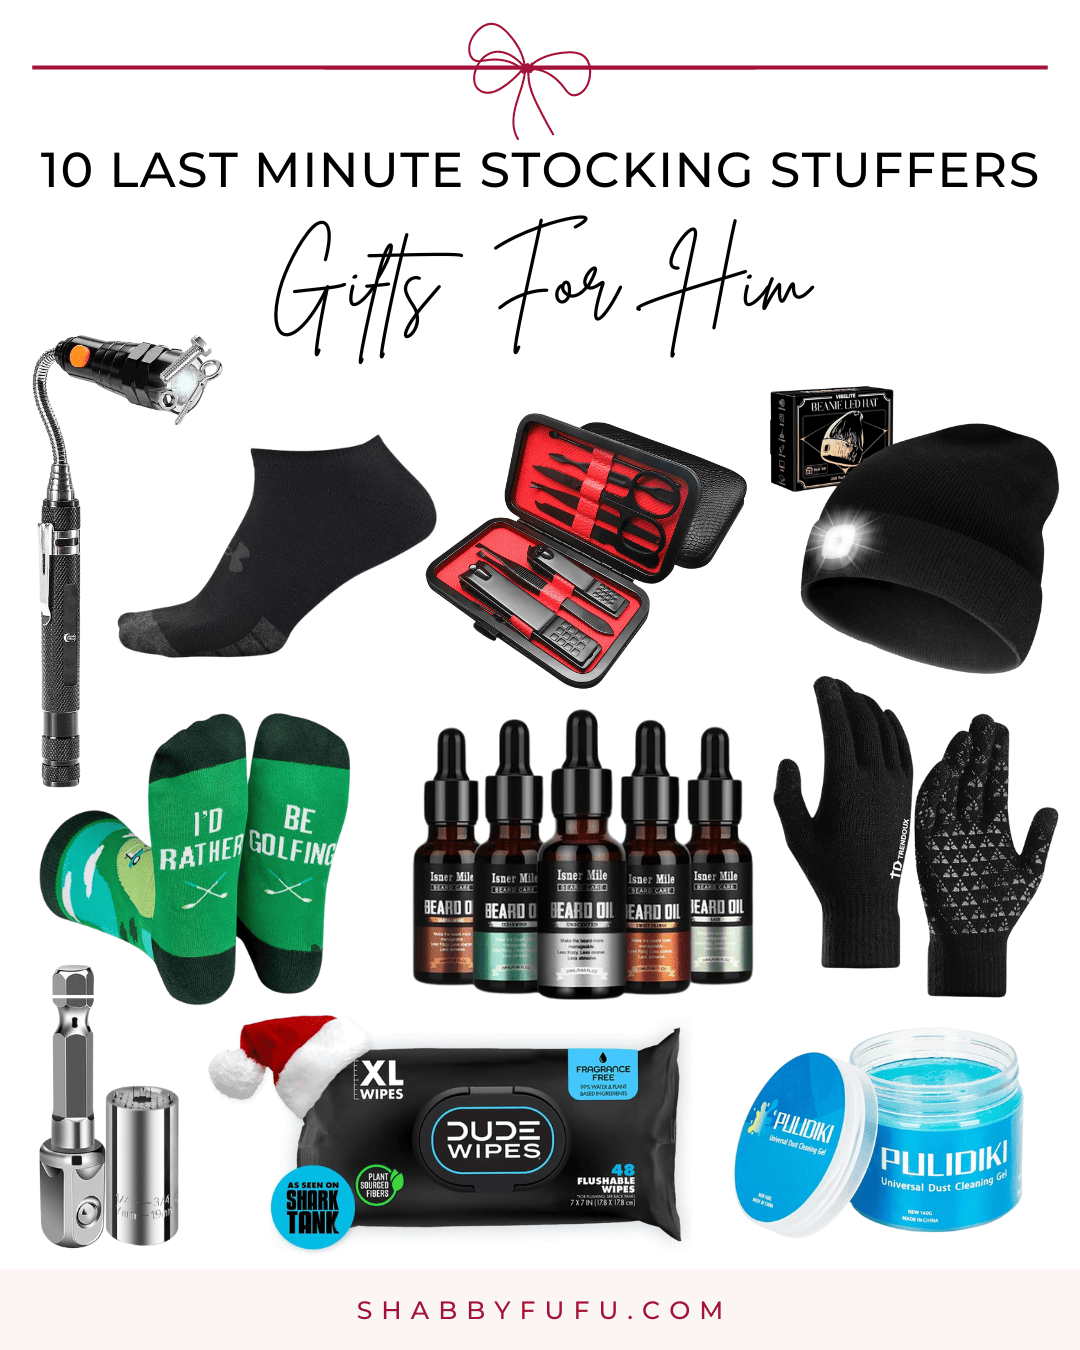 Pinterest decorative collage featuring items and products titled "10 Last Minute Stocking Stuffers For Him"